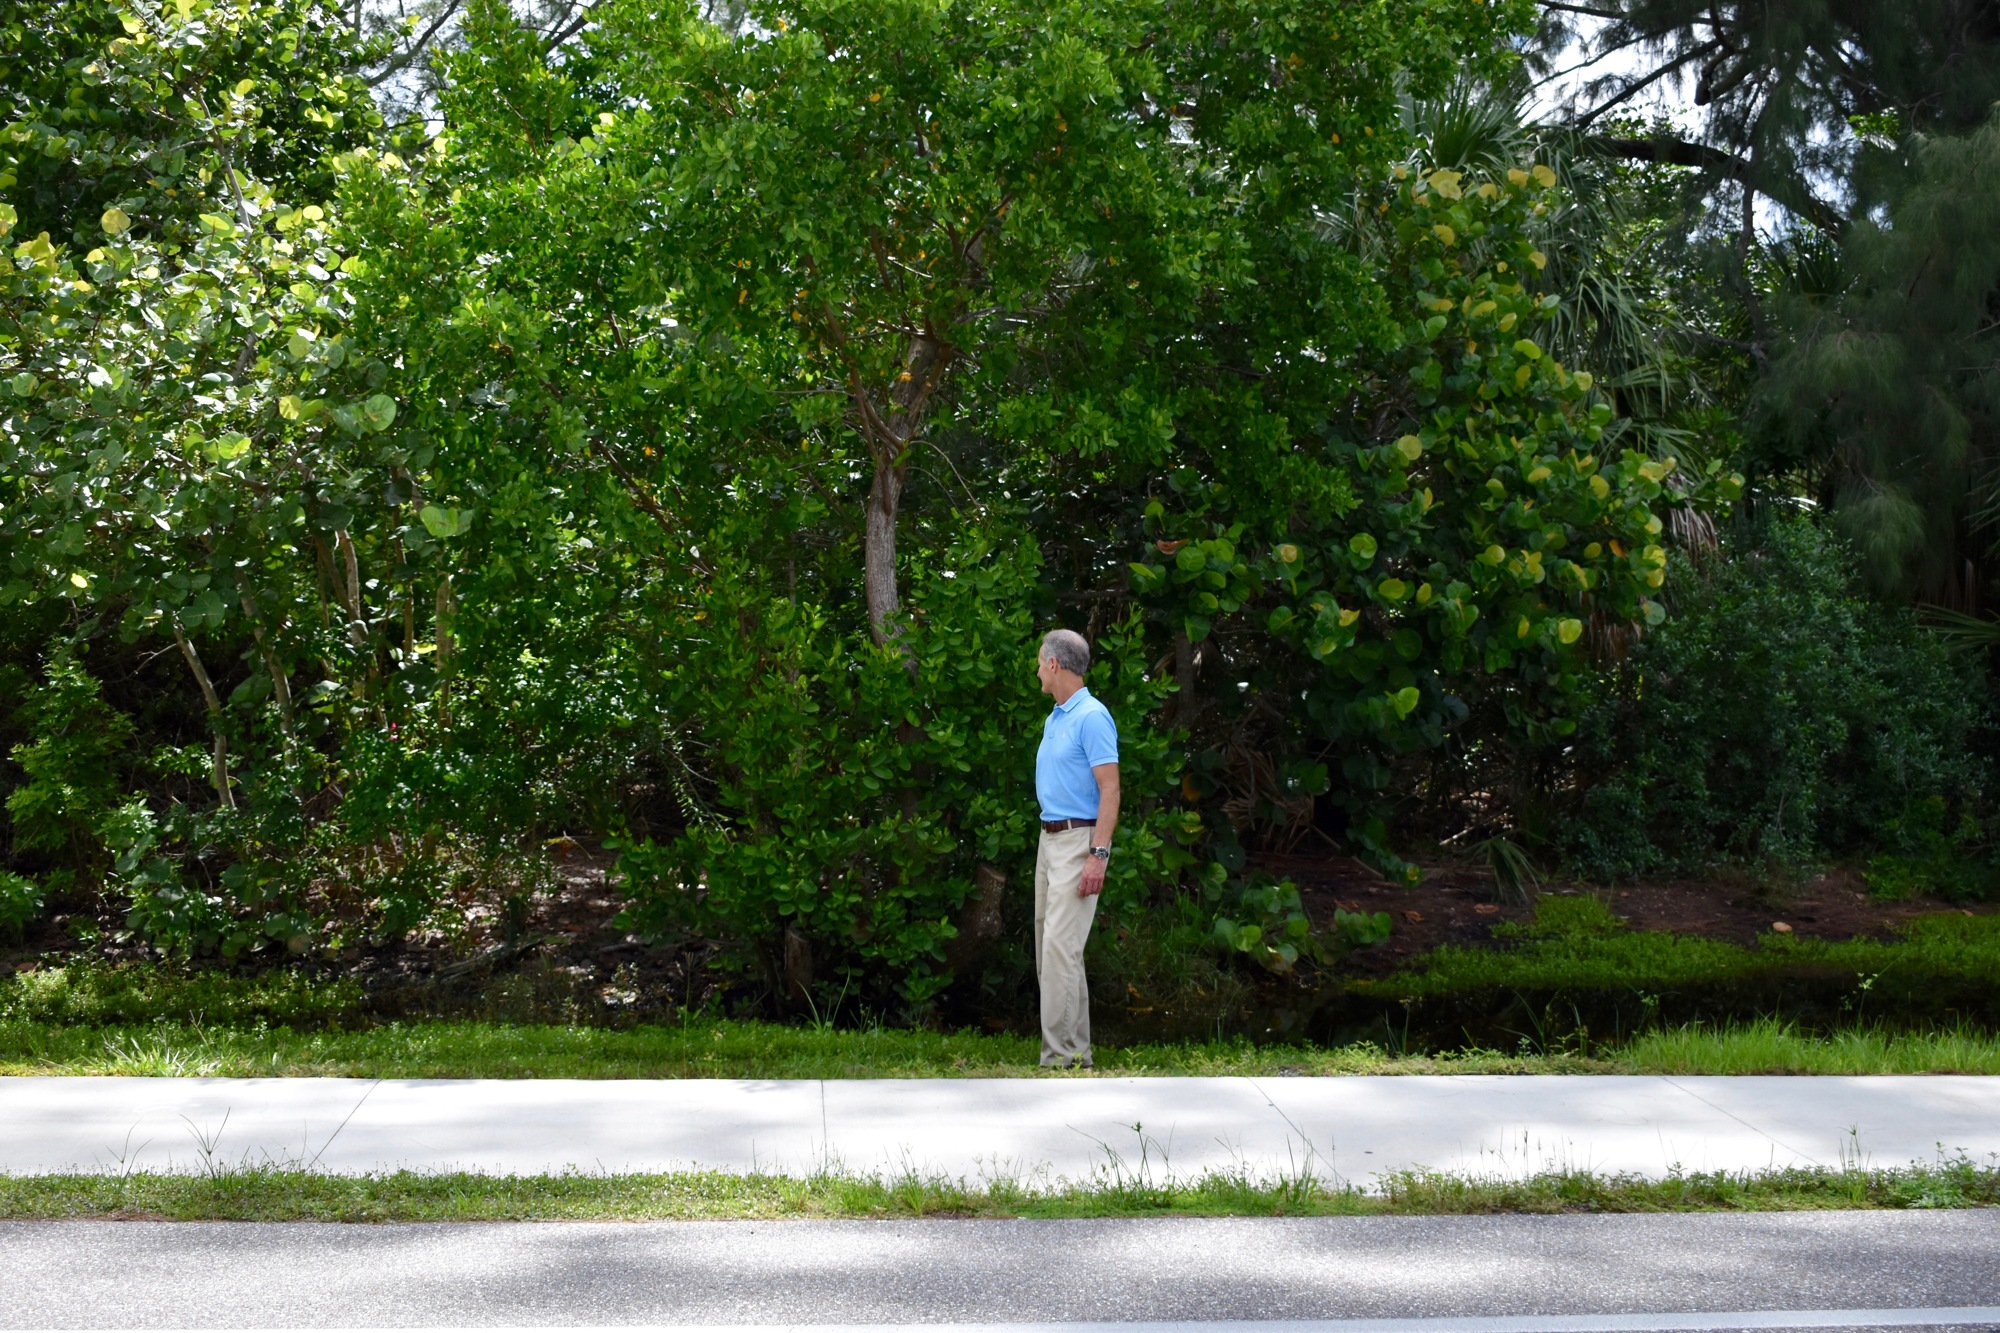 Bill Saba examines part of the land he sold, which had been in his family almost 90 years.